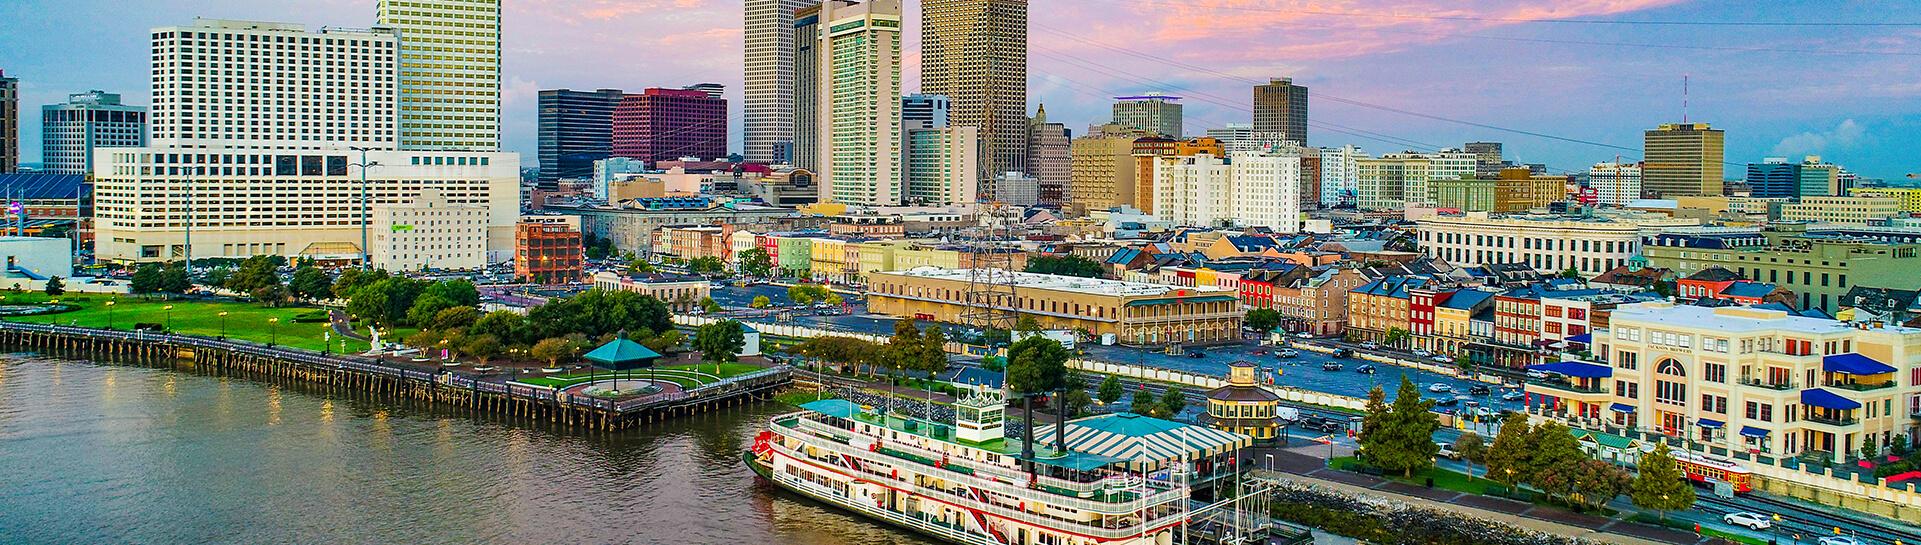 The French Quarter in New Orleans